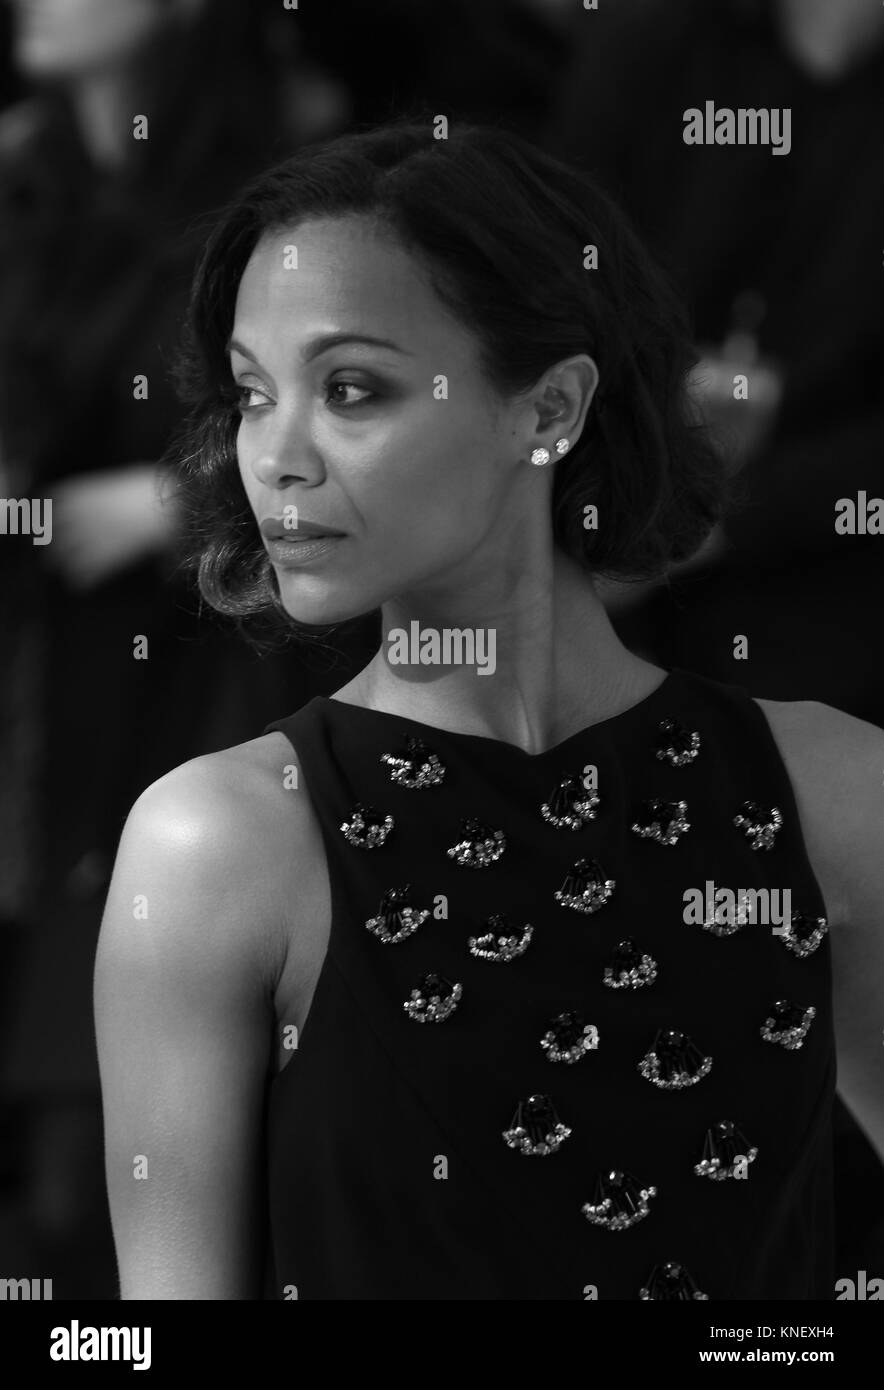 London, UK, 2nd May, 2013: Image digitally altered to monochrome Zoe Saldana attends the UK Premiere of 'Star Trek Into Darkness' at The Empire Cinema Stock Photo